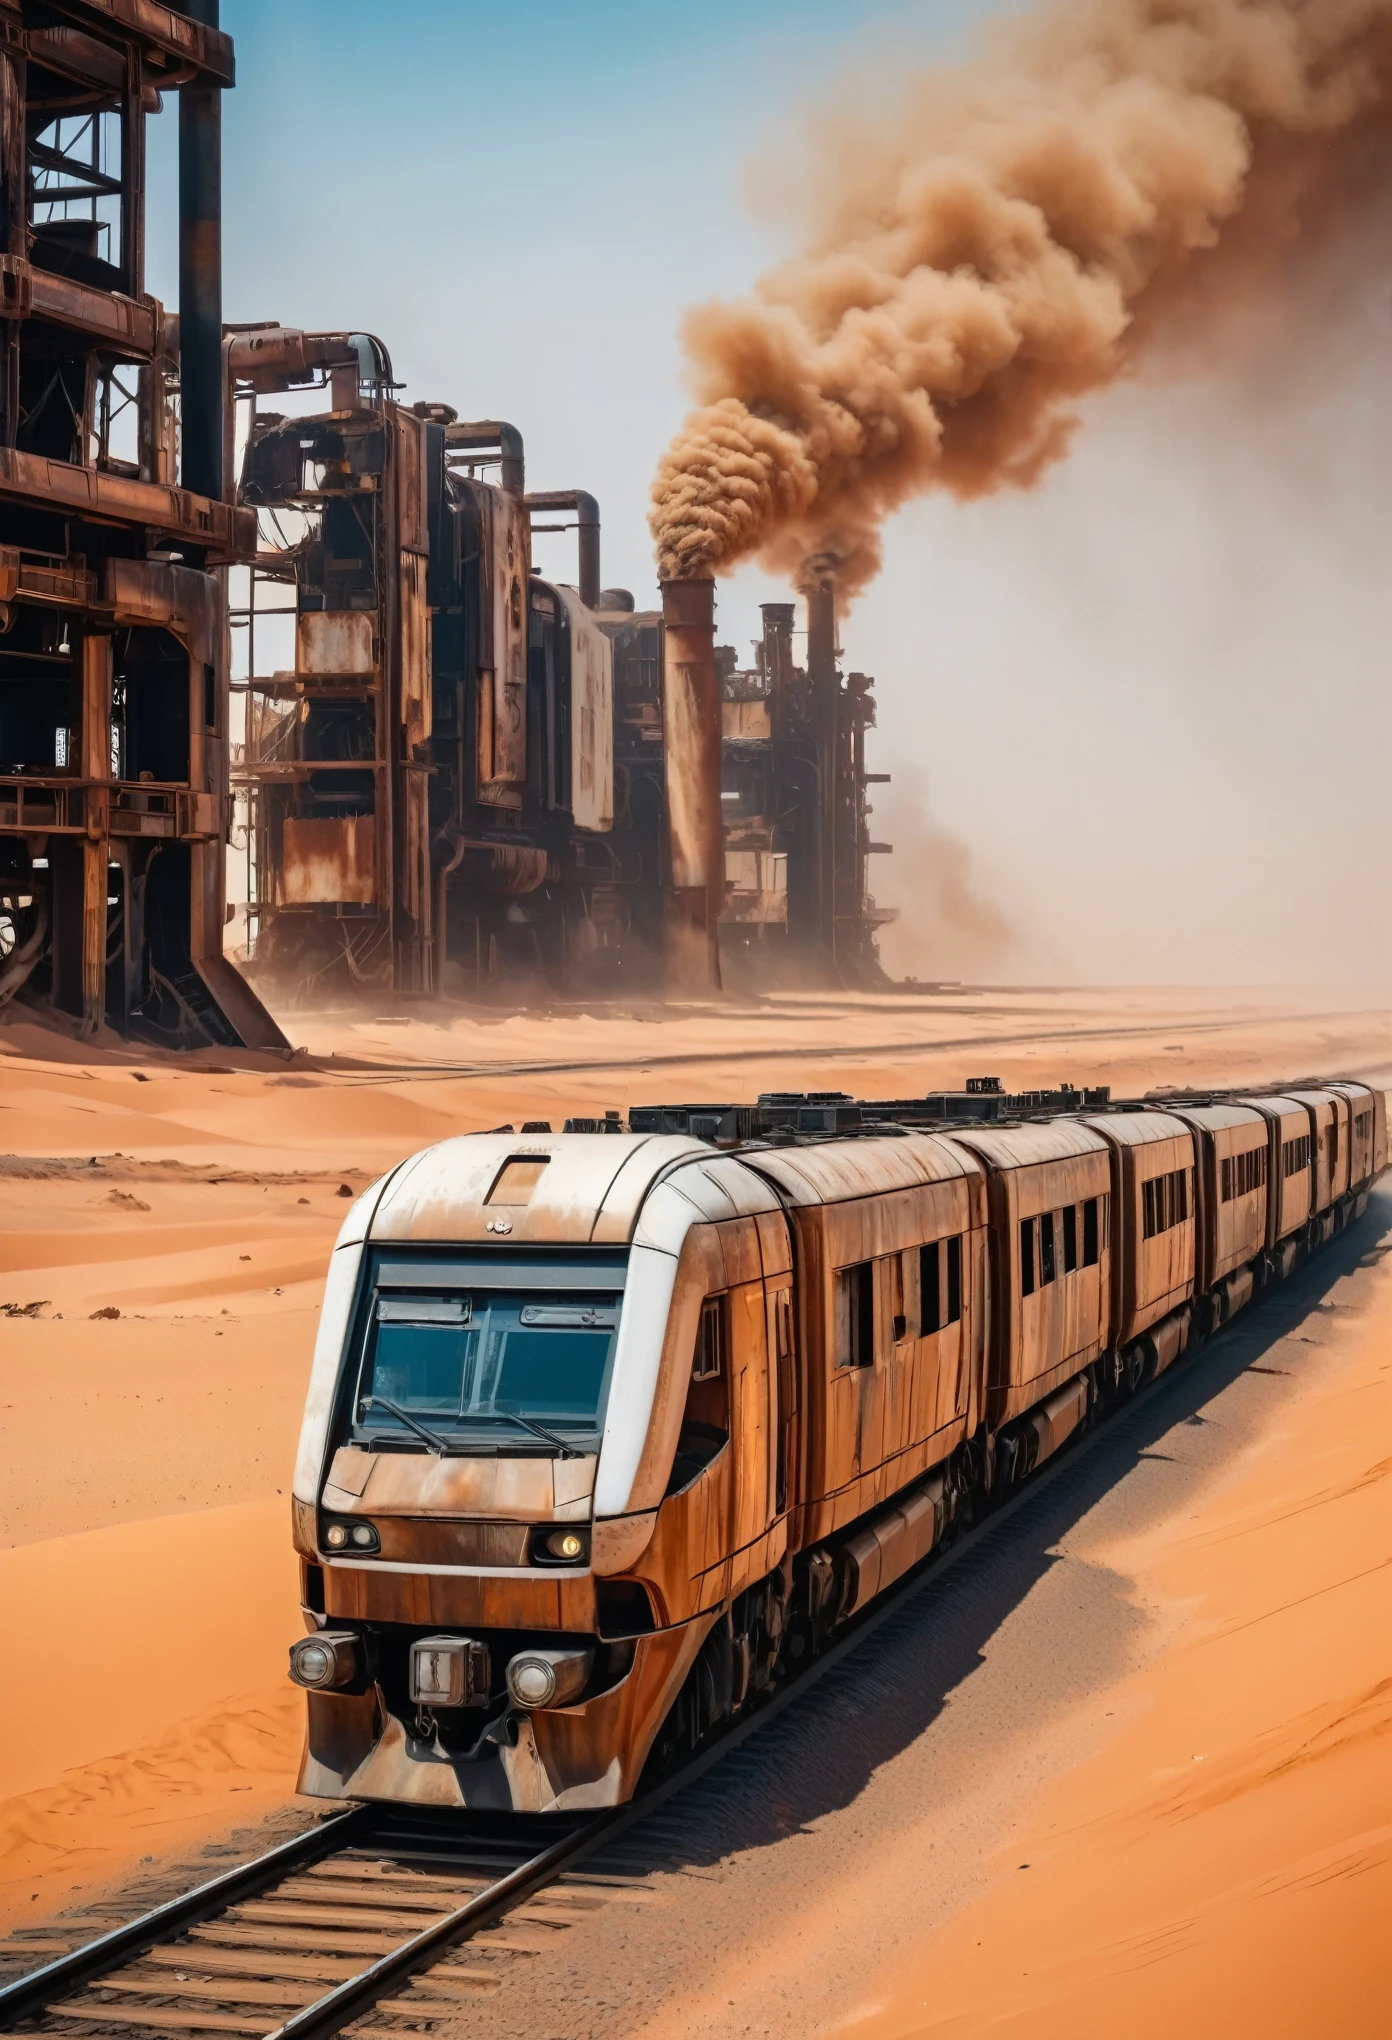 diagonal image of a modern rusty and ultra futuristic double decker and industrial metal train crossing the sahara desert, post-apocalyptic environment, the train passes through a destroyed industrial area with tall metal towers belching smoke 